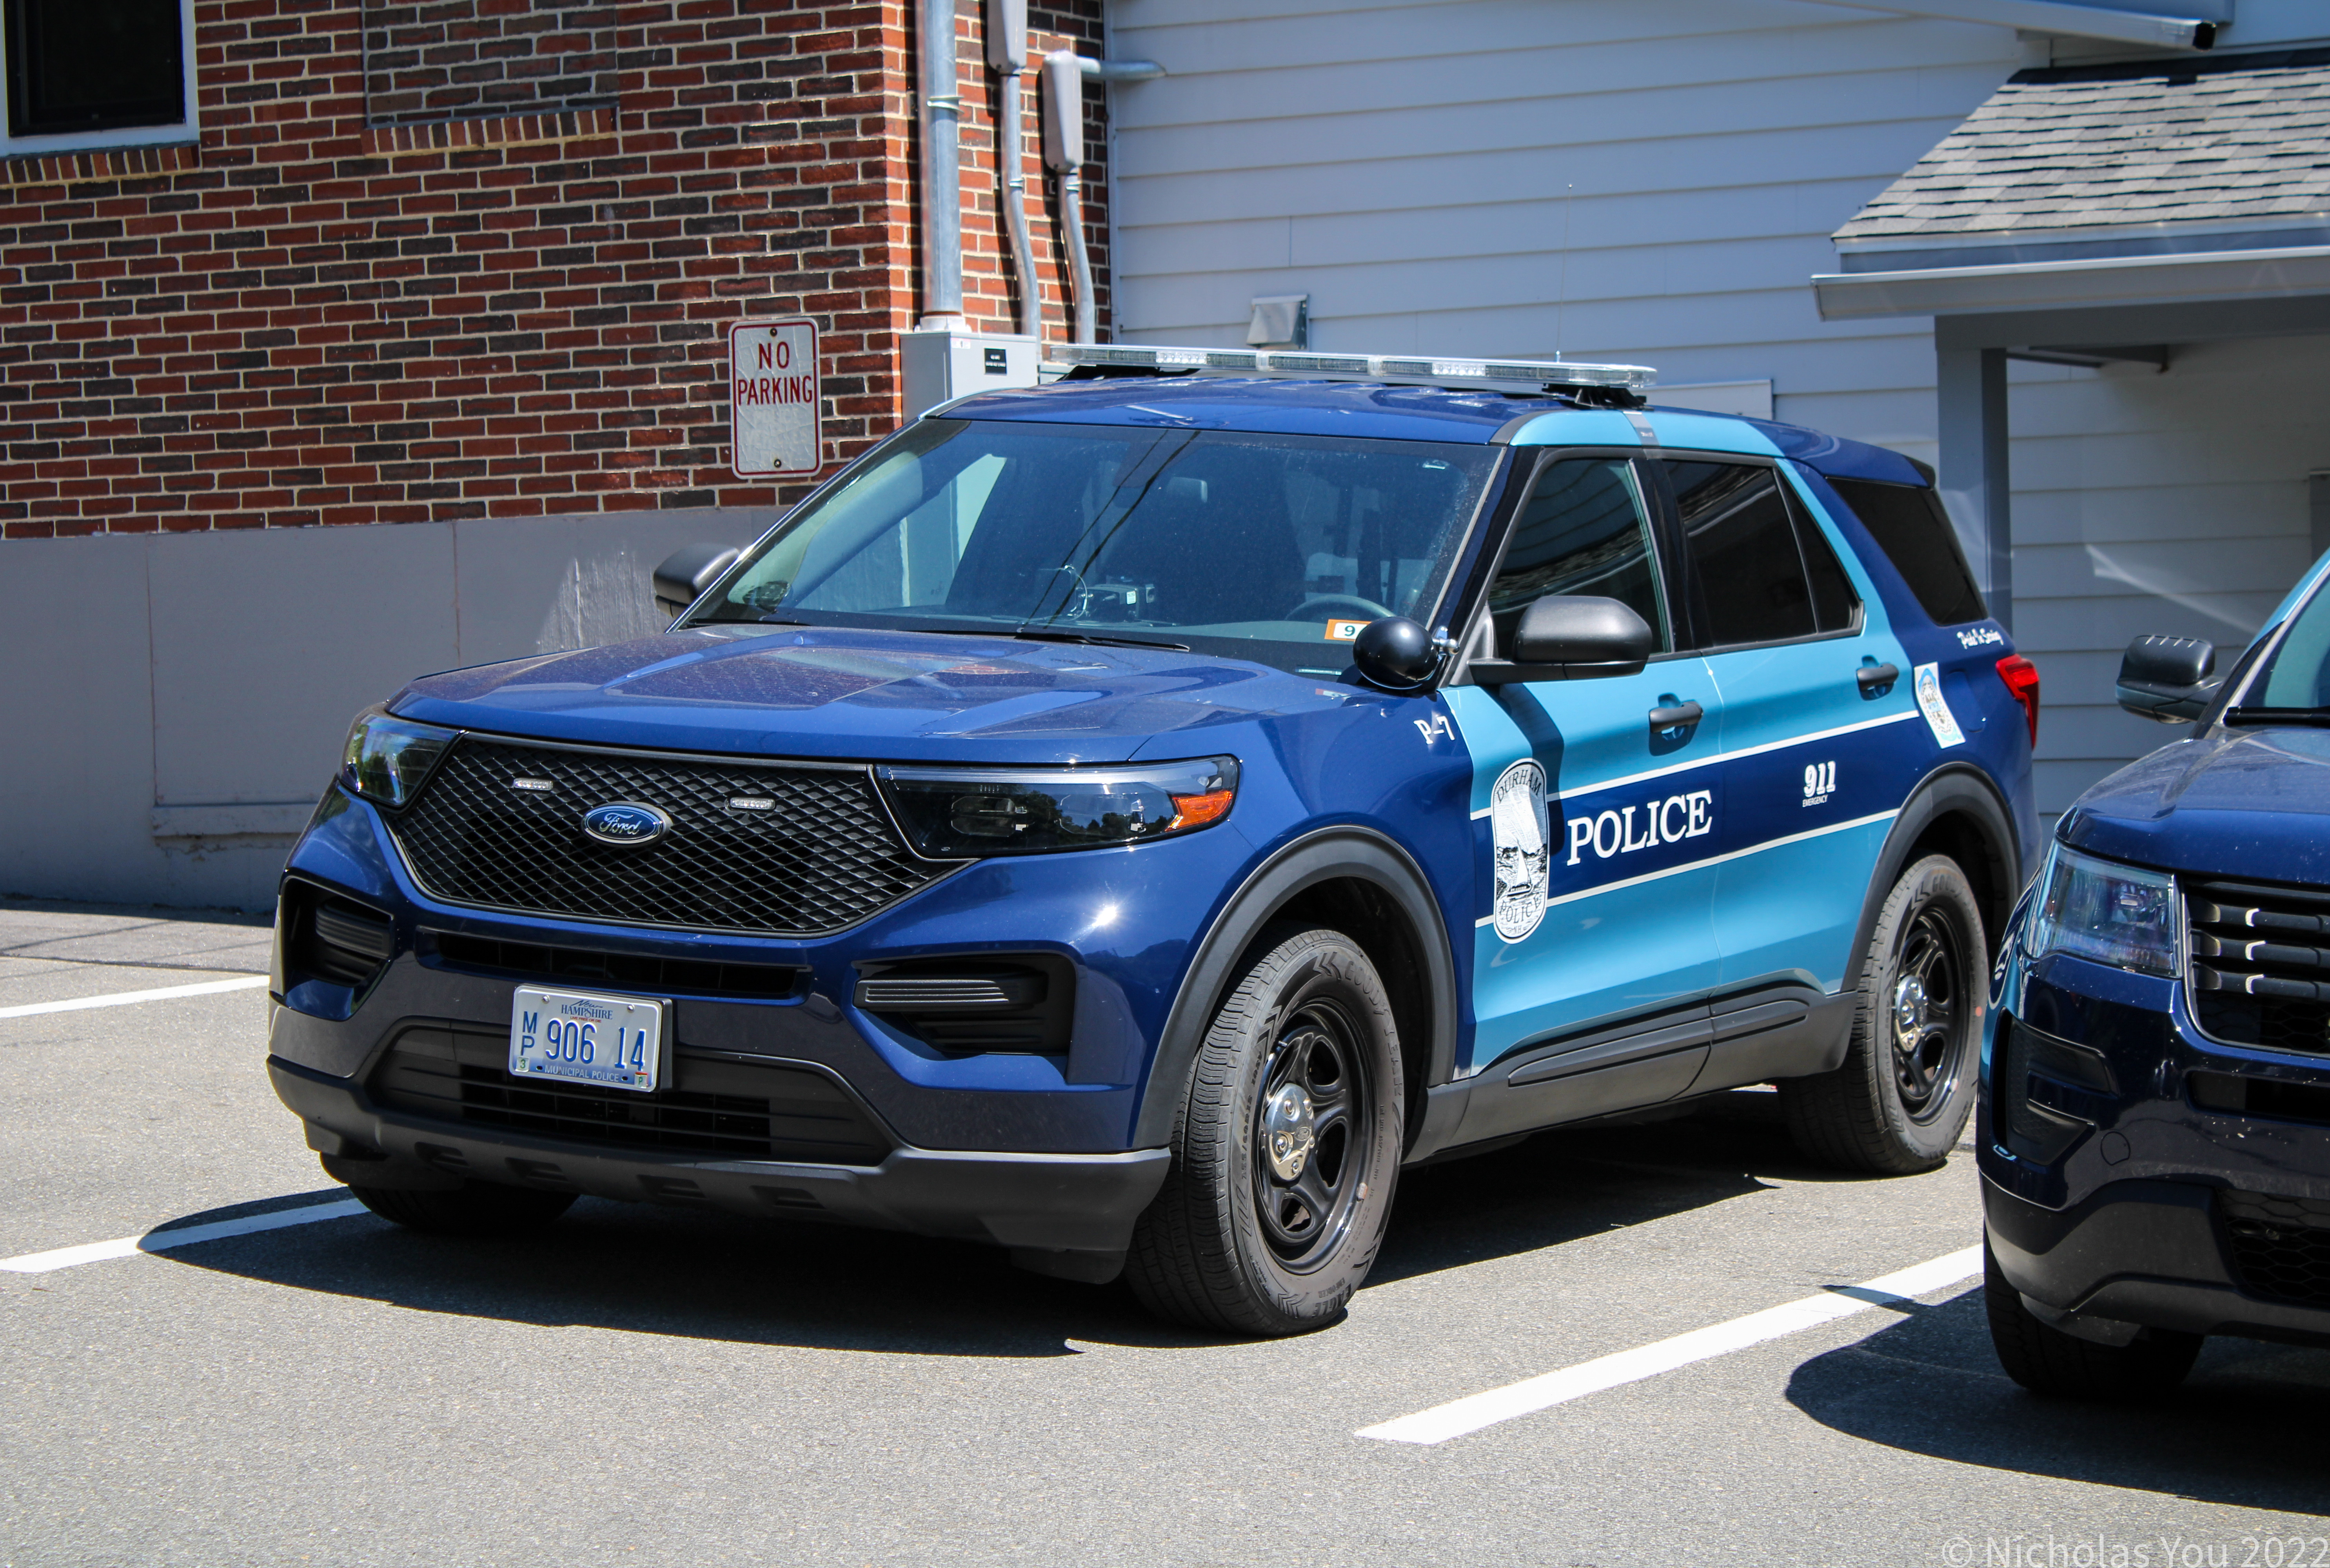 A photo  of Durham Police
            Cruiser P-14, a 2020-2022 Ford Police Interceptor Utility             taken by Nicholas You